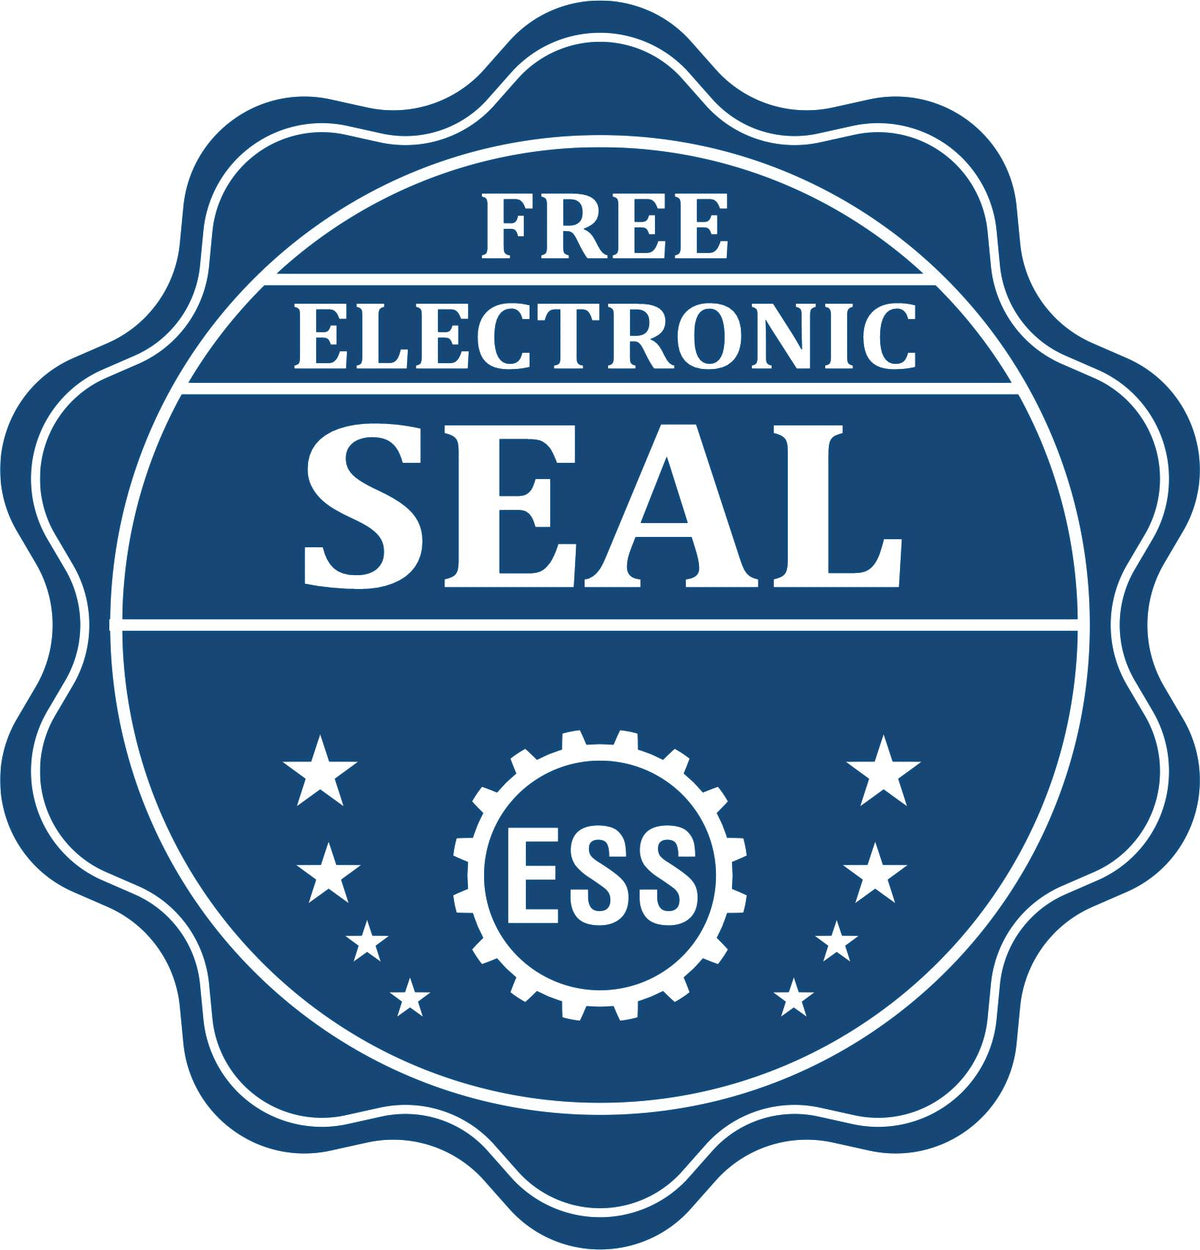 A badge showing a free electronic seal for the Hybrid Maryland Land Surveyor Seal with stars and the ESS gear on the emblem.